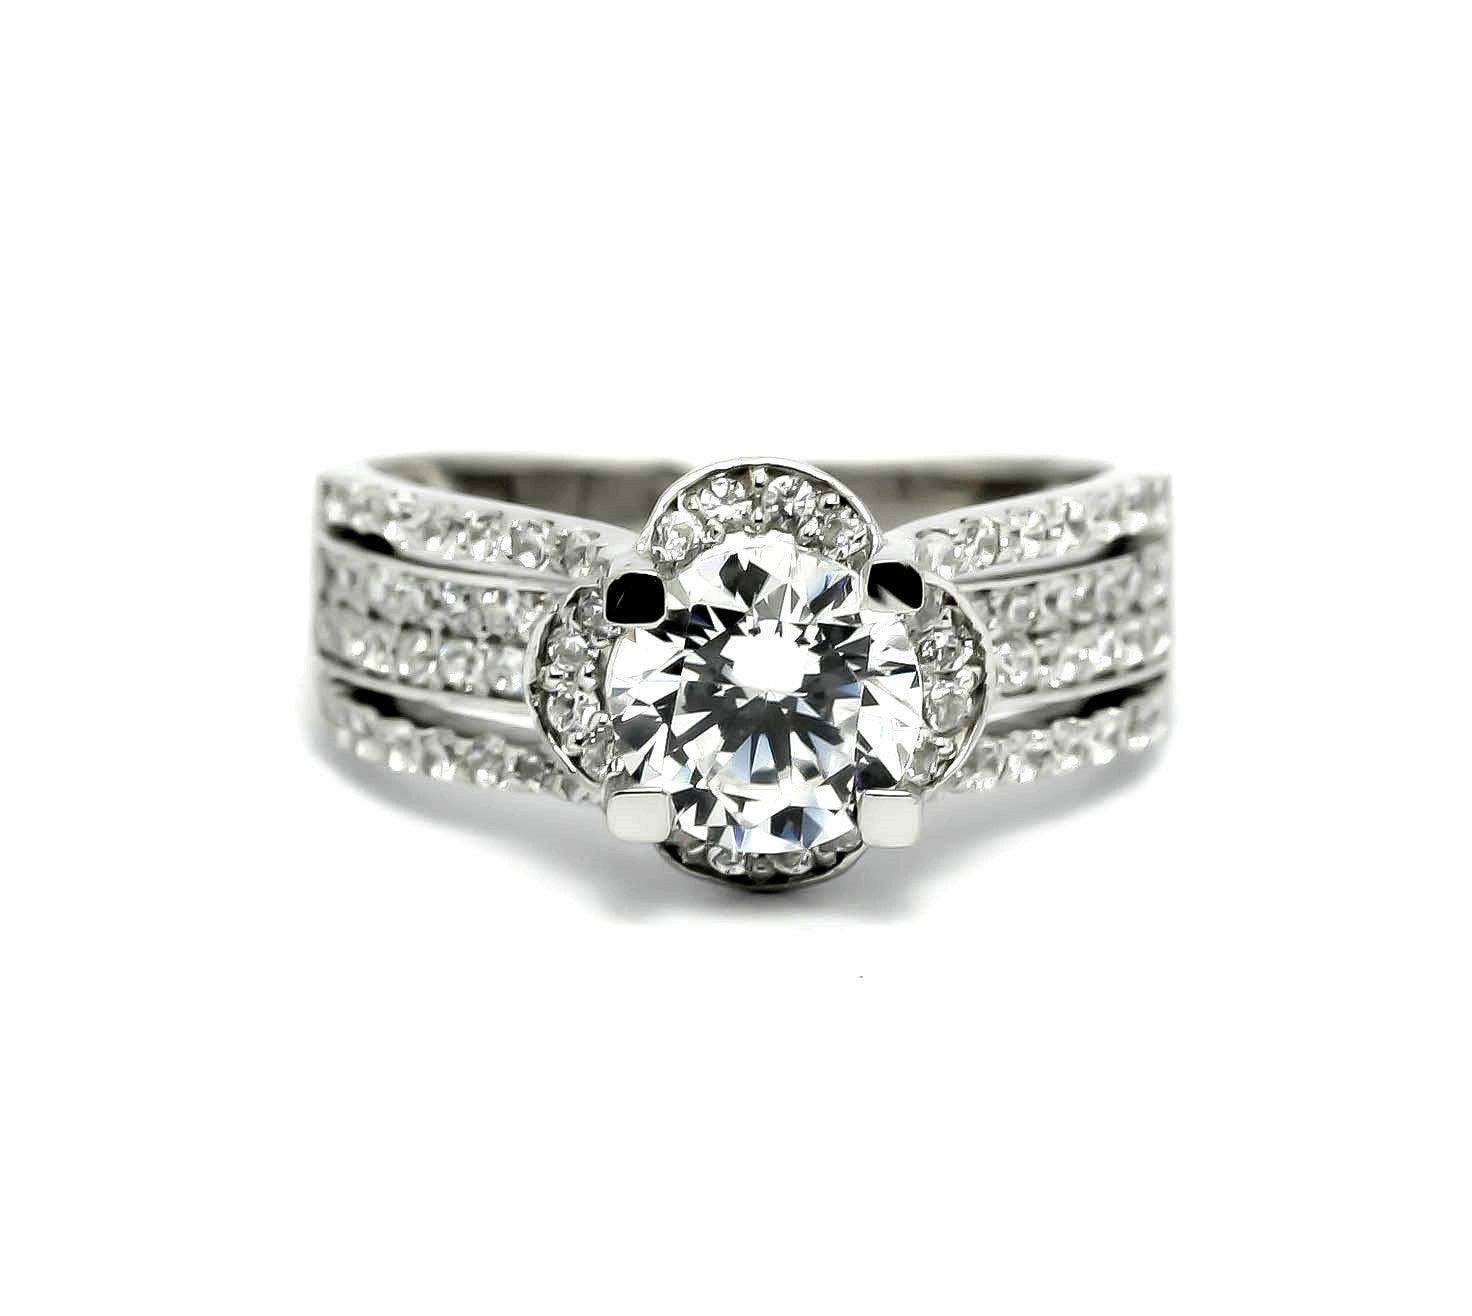 Moissanite Engagement Ring, Unique Halo 4 Line Shank With .70 Carat Diamond & 1.25 Carat Forever Brilliant Moissanite Center Stone - FBY11579